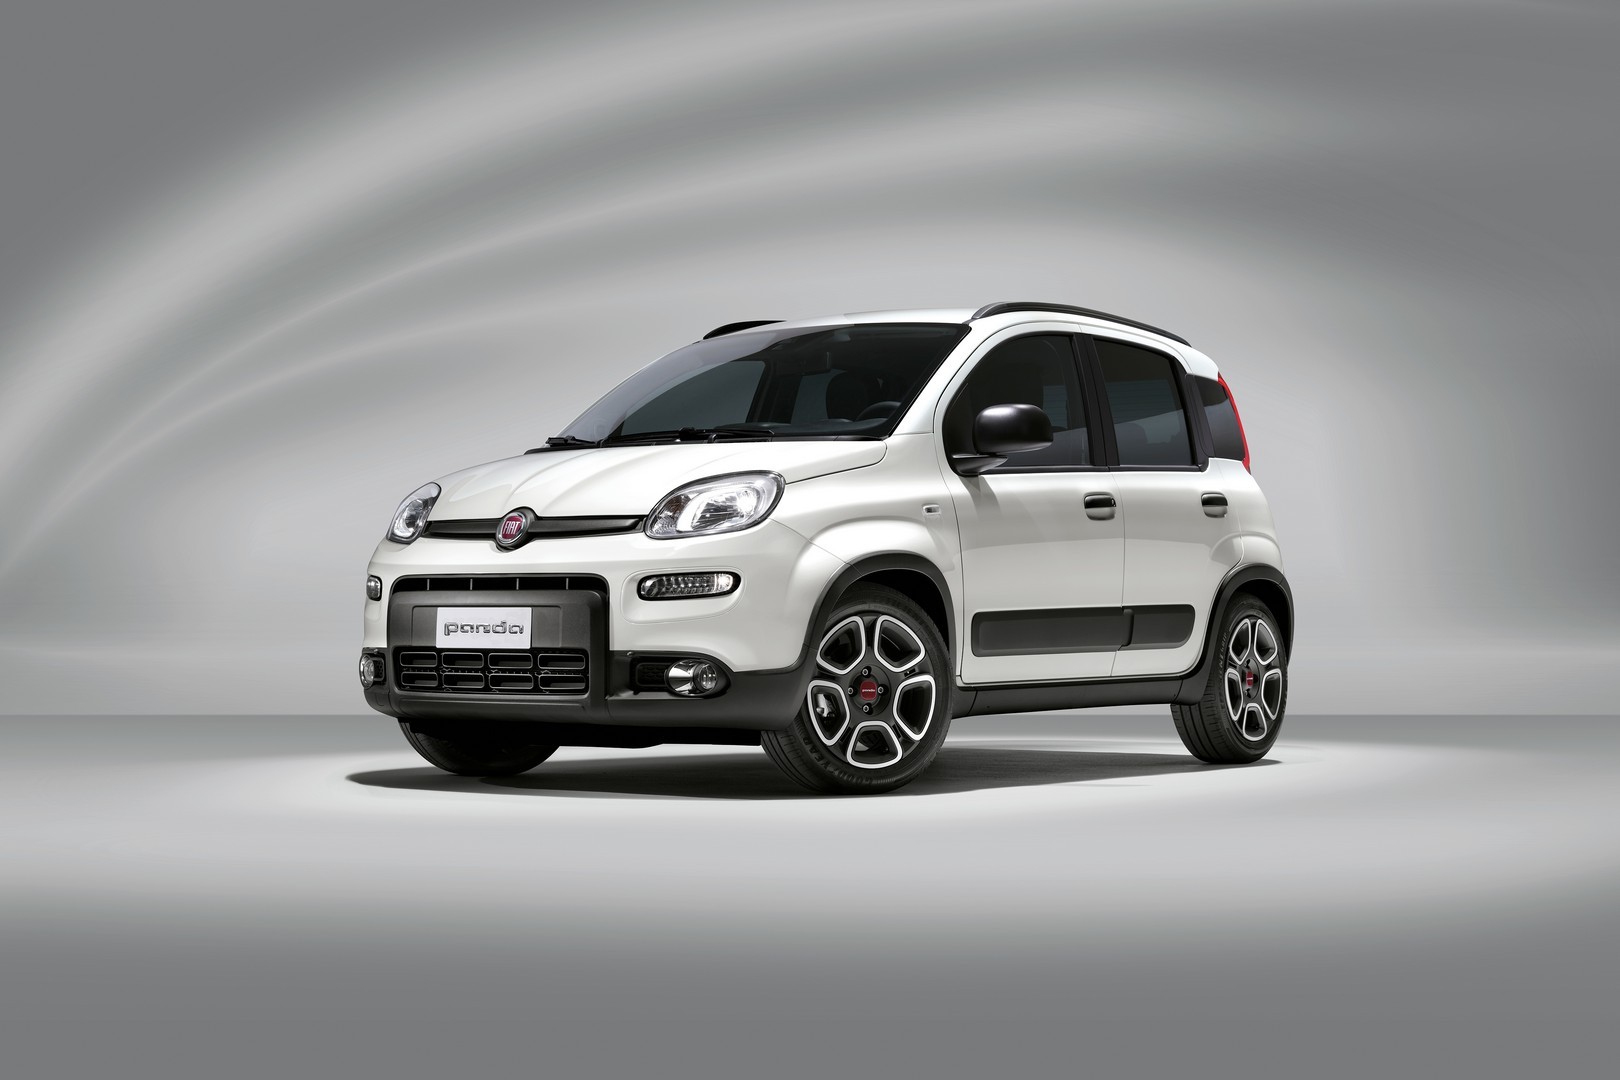 Fiat Panda Remains Accessible in the UK, Starting at Less Than